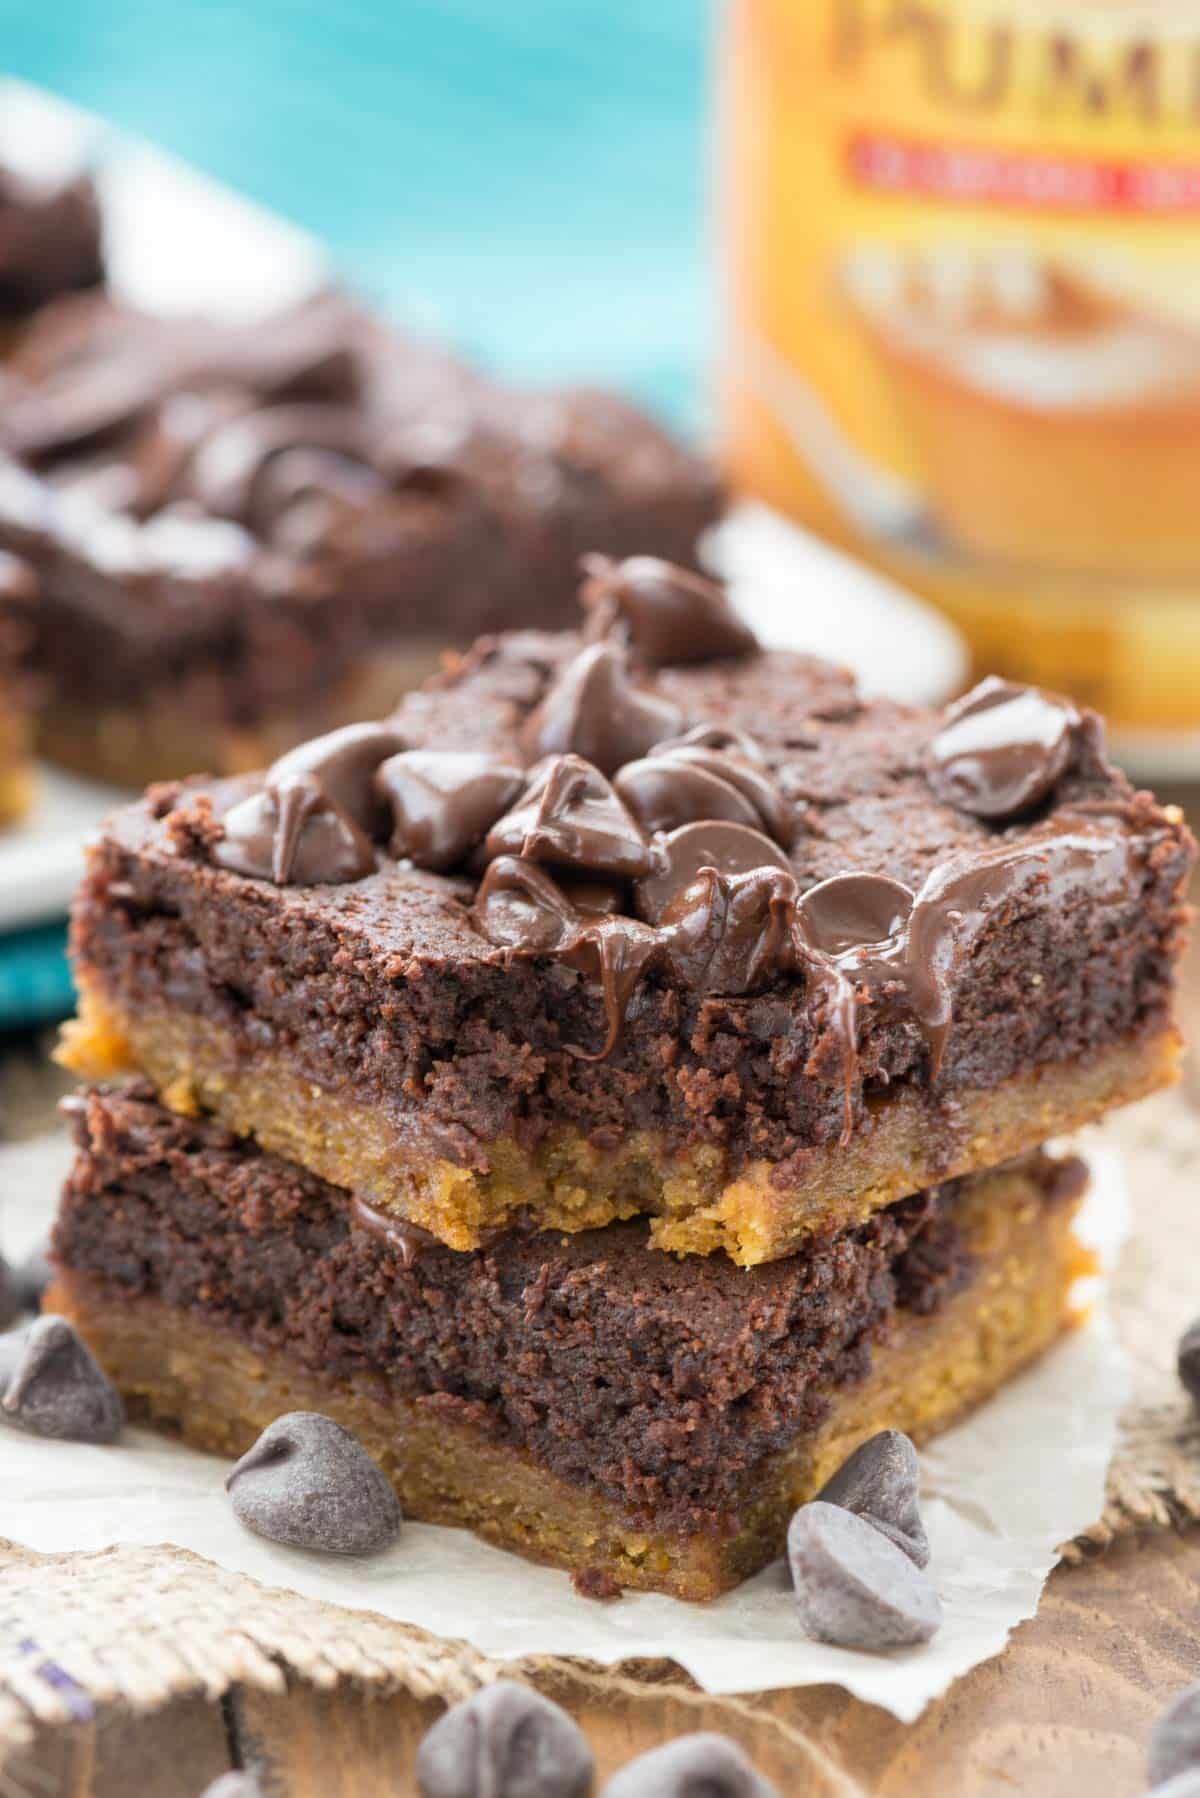 stacked brownies with chocolate chips baked in on top.